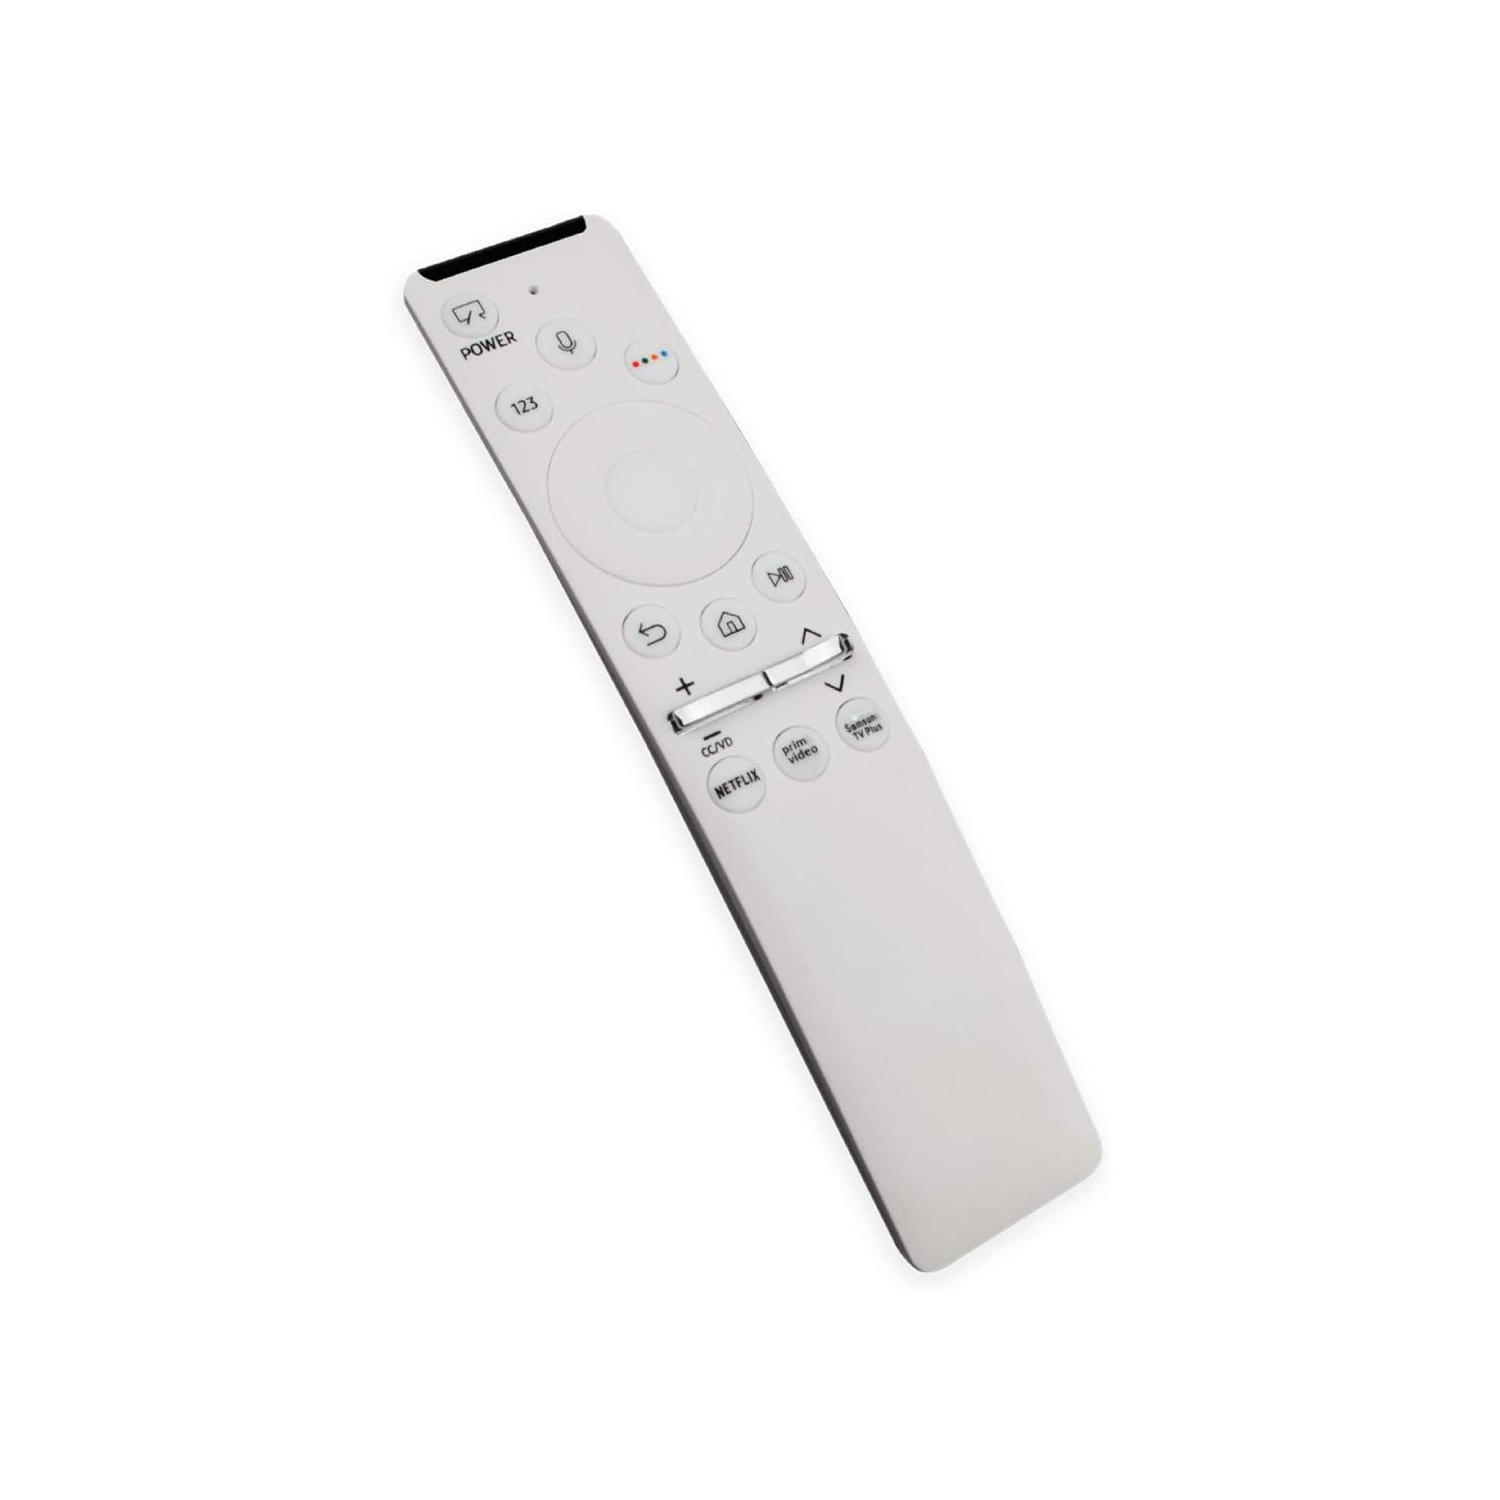 Refurbished (Good) Samsung BN59-01330H Replace Smart Voice Remote Control